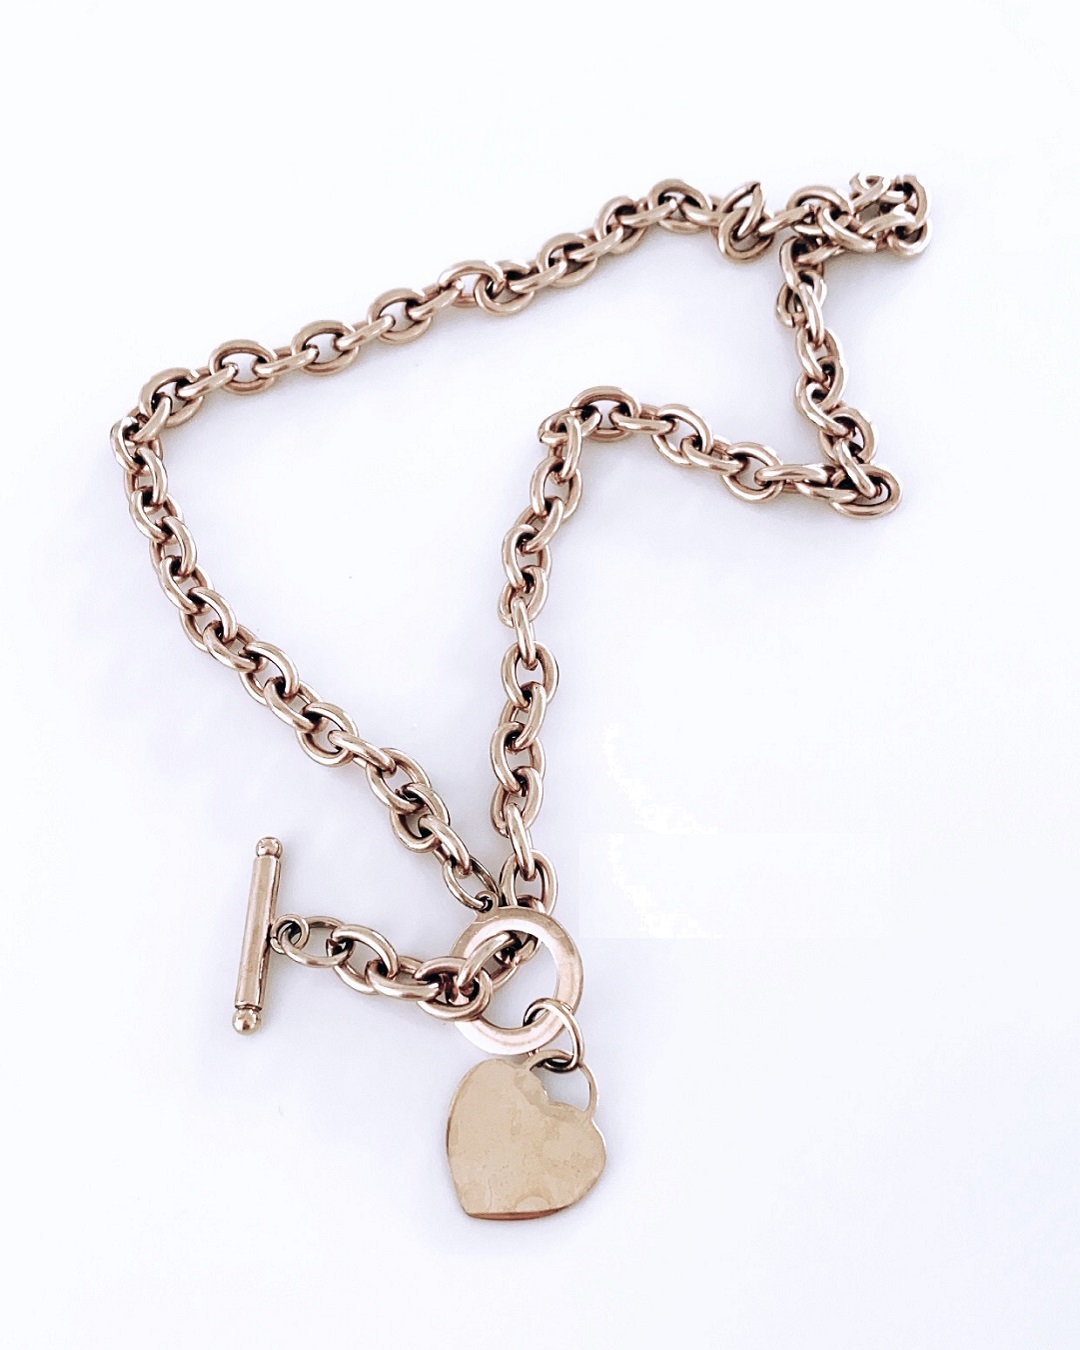 Gold chain necklace with heart